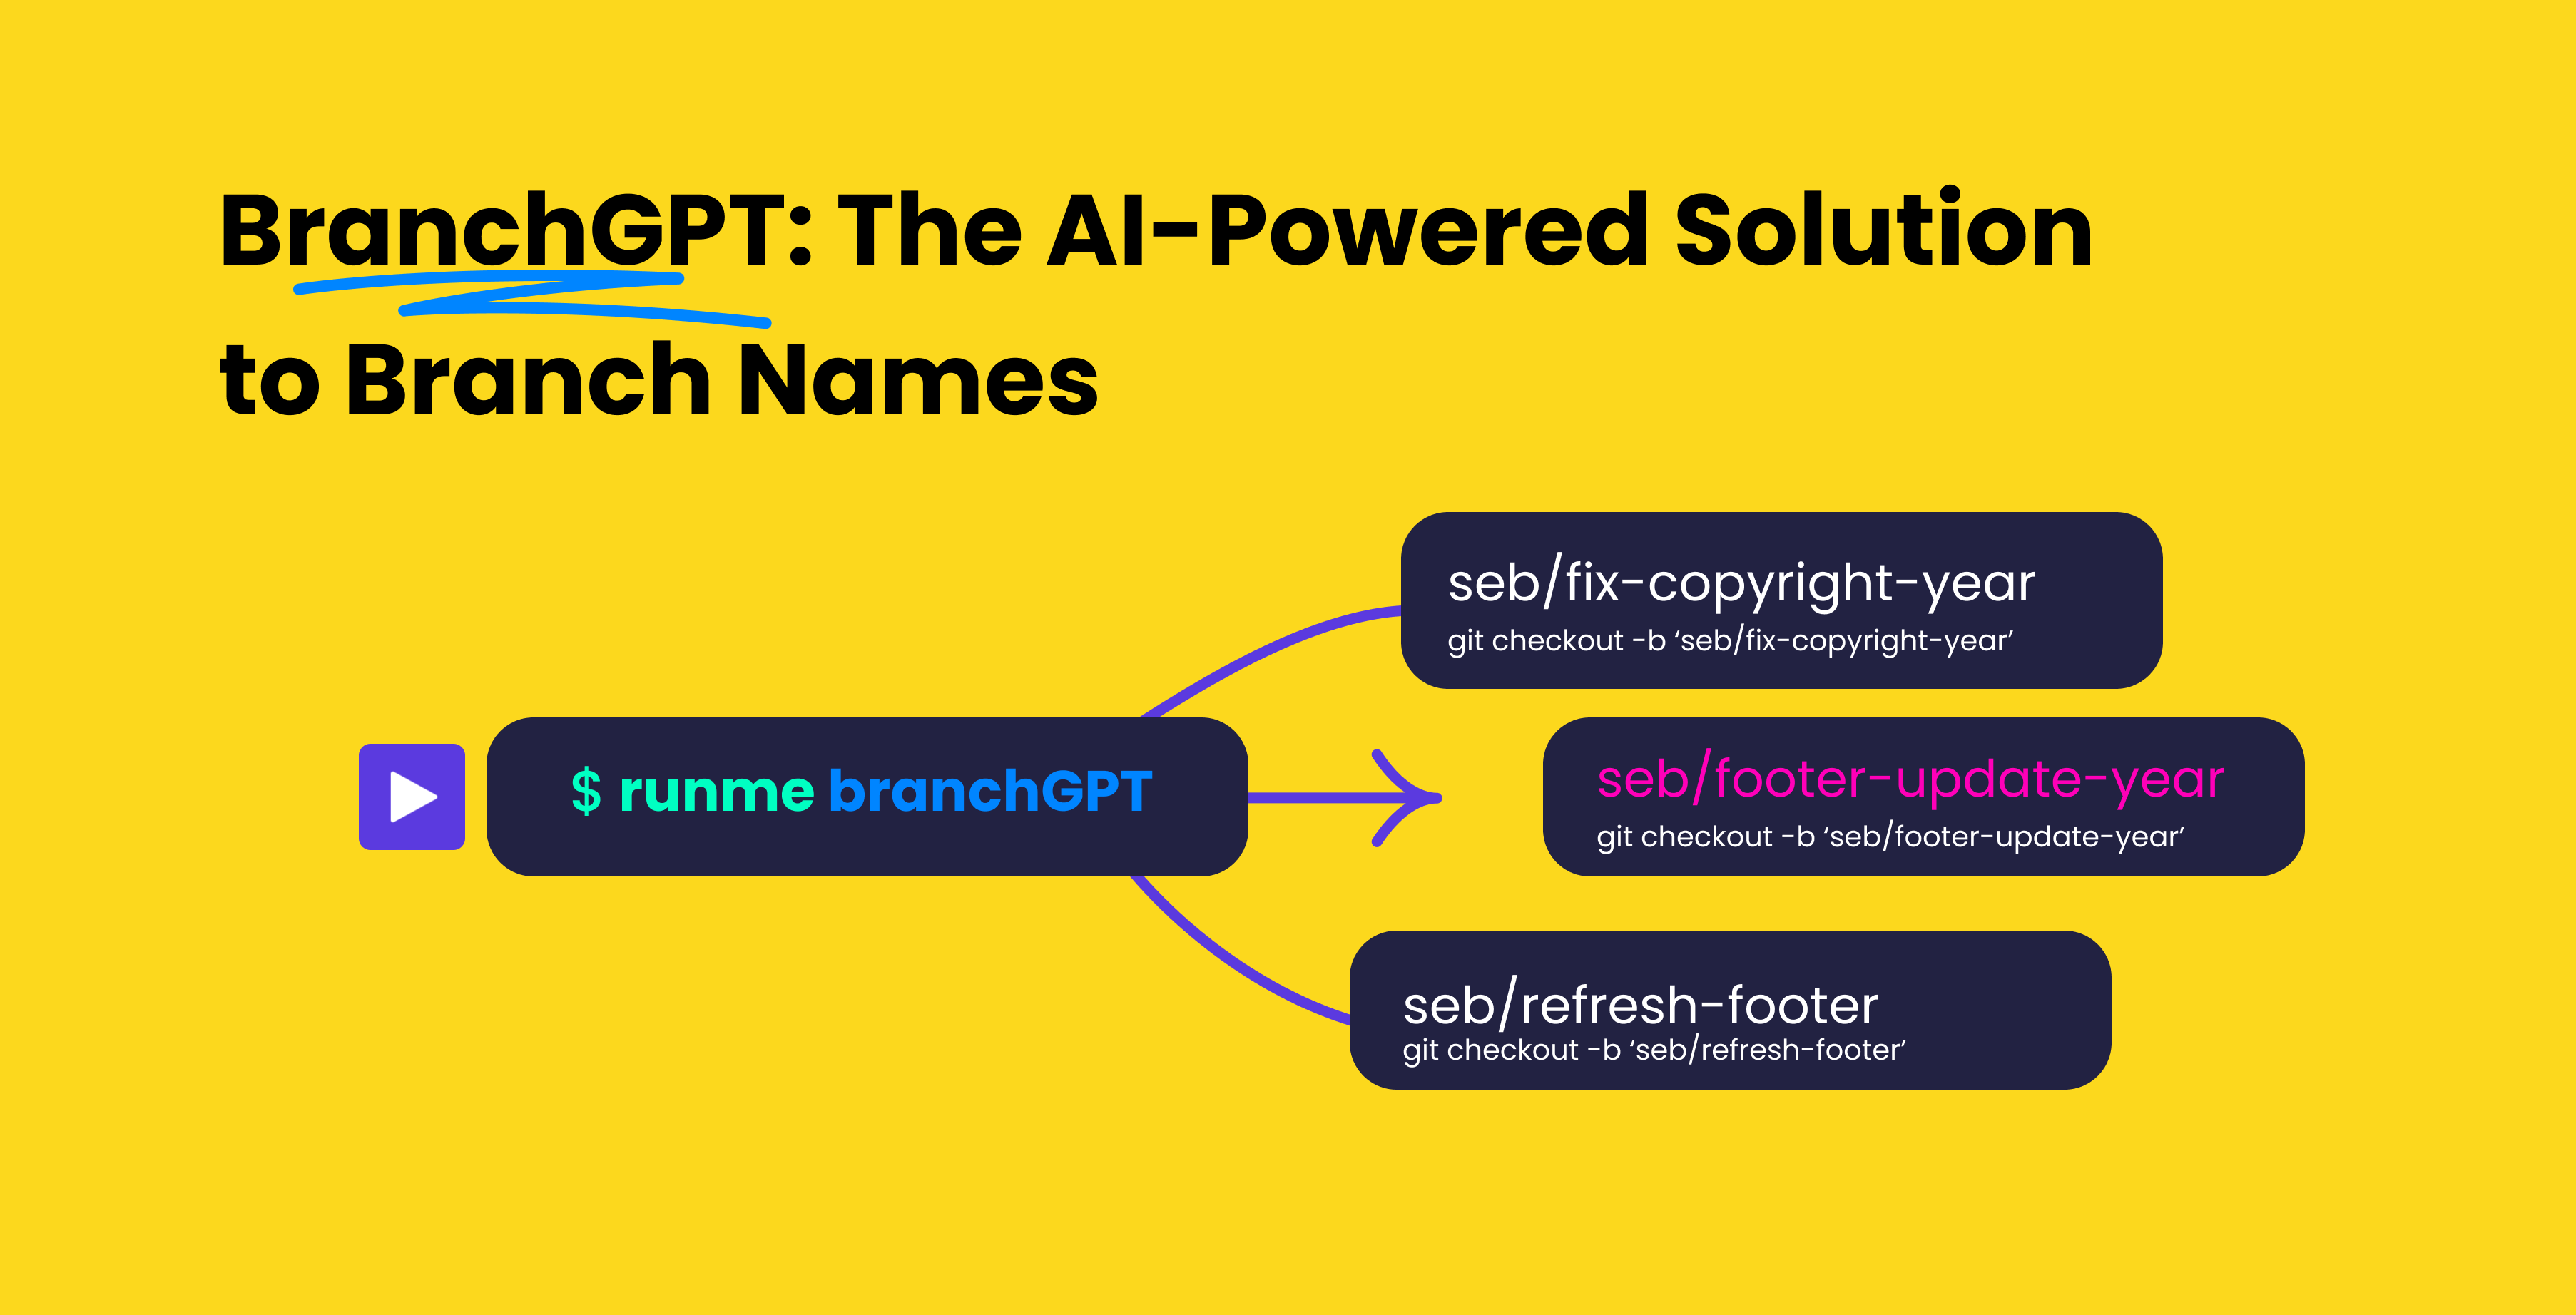 BranchGPT: The AI-Powered Solution to Branch Names